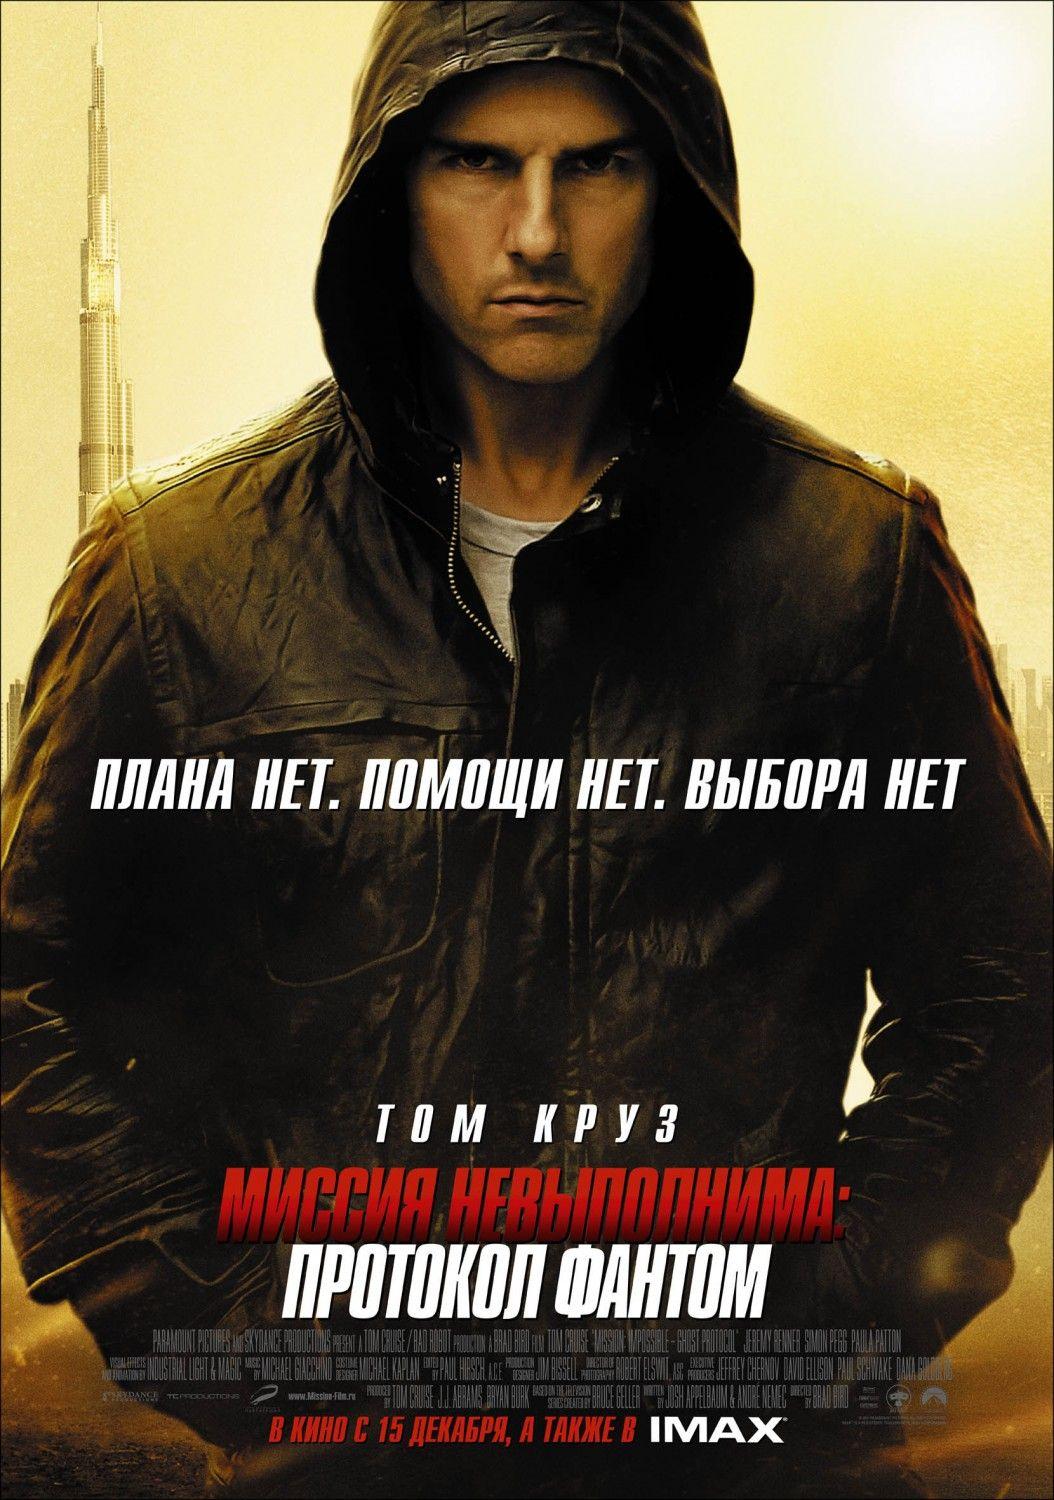 1280x1024px Mission Impossible Ghost Protocol 173.66 KB